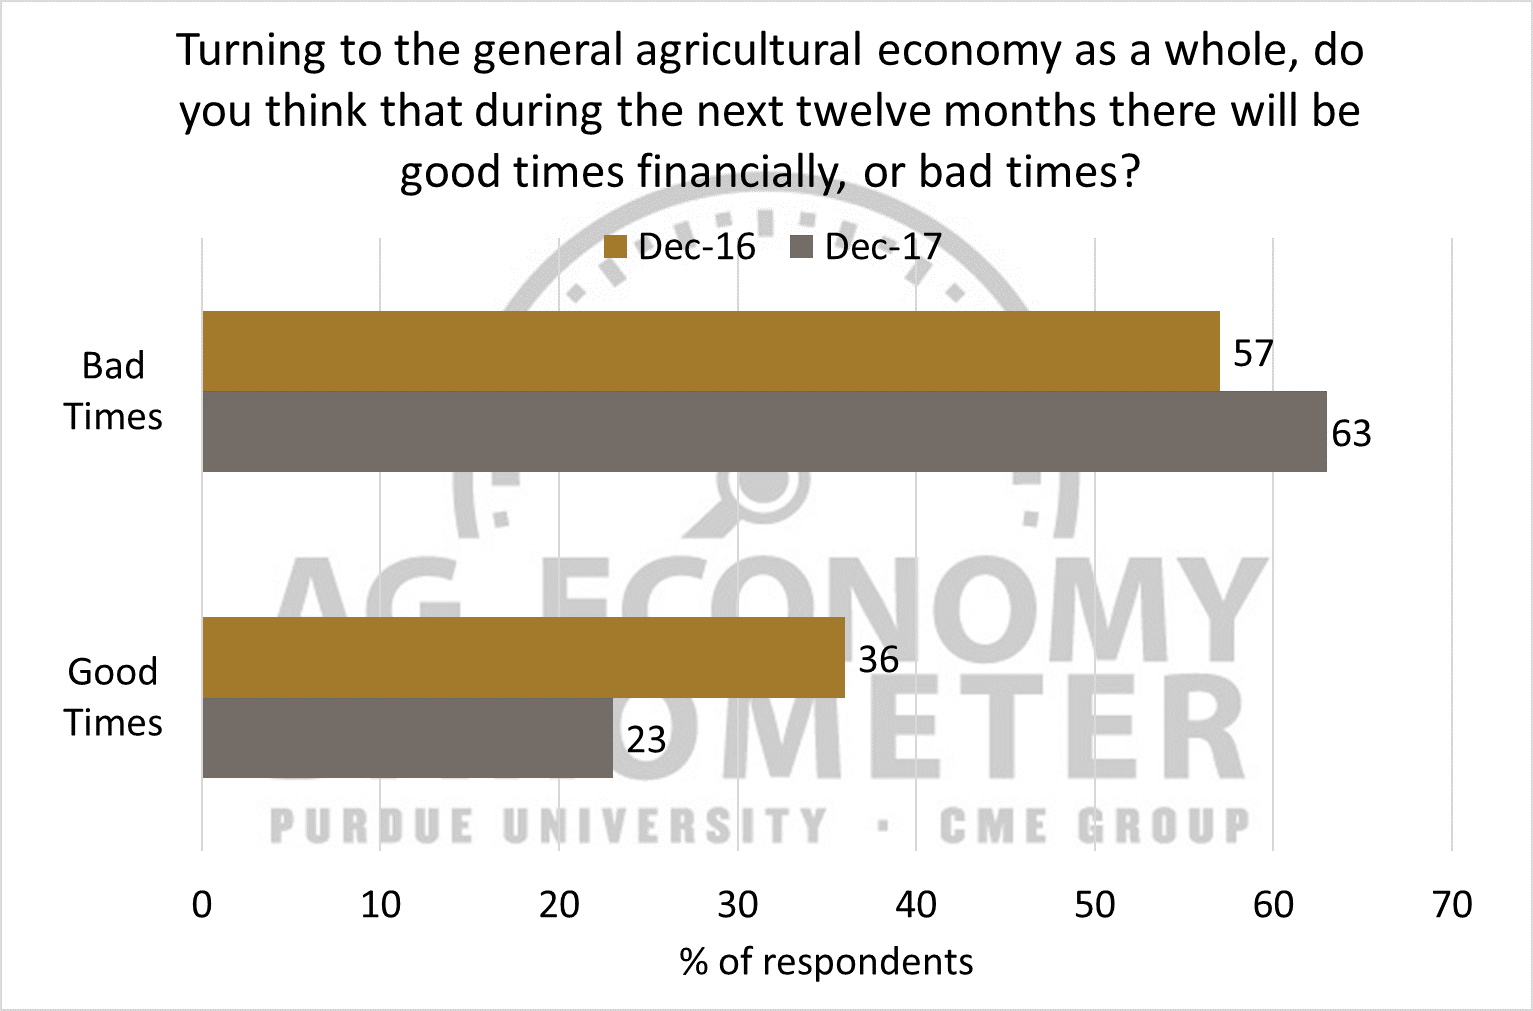 Figure 6. Share of respondents expecting “good times” and “bad times” in the general agricultural economy over the upcoming 12 months, December 2016 and December 2017.